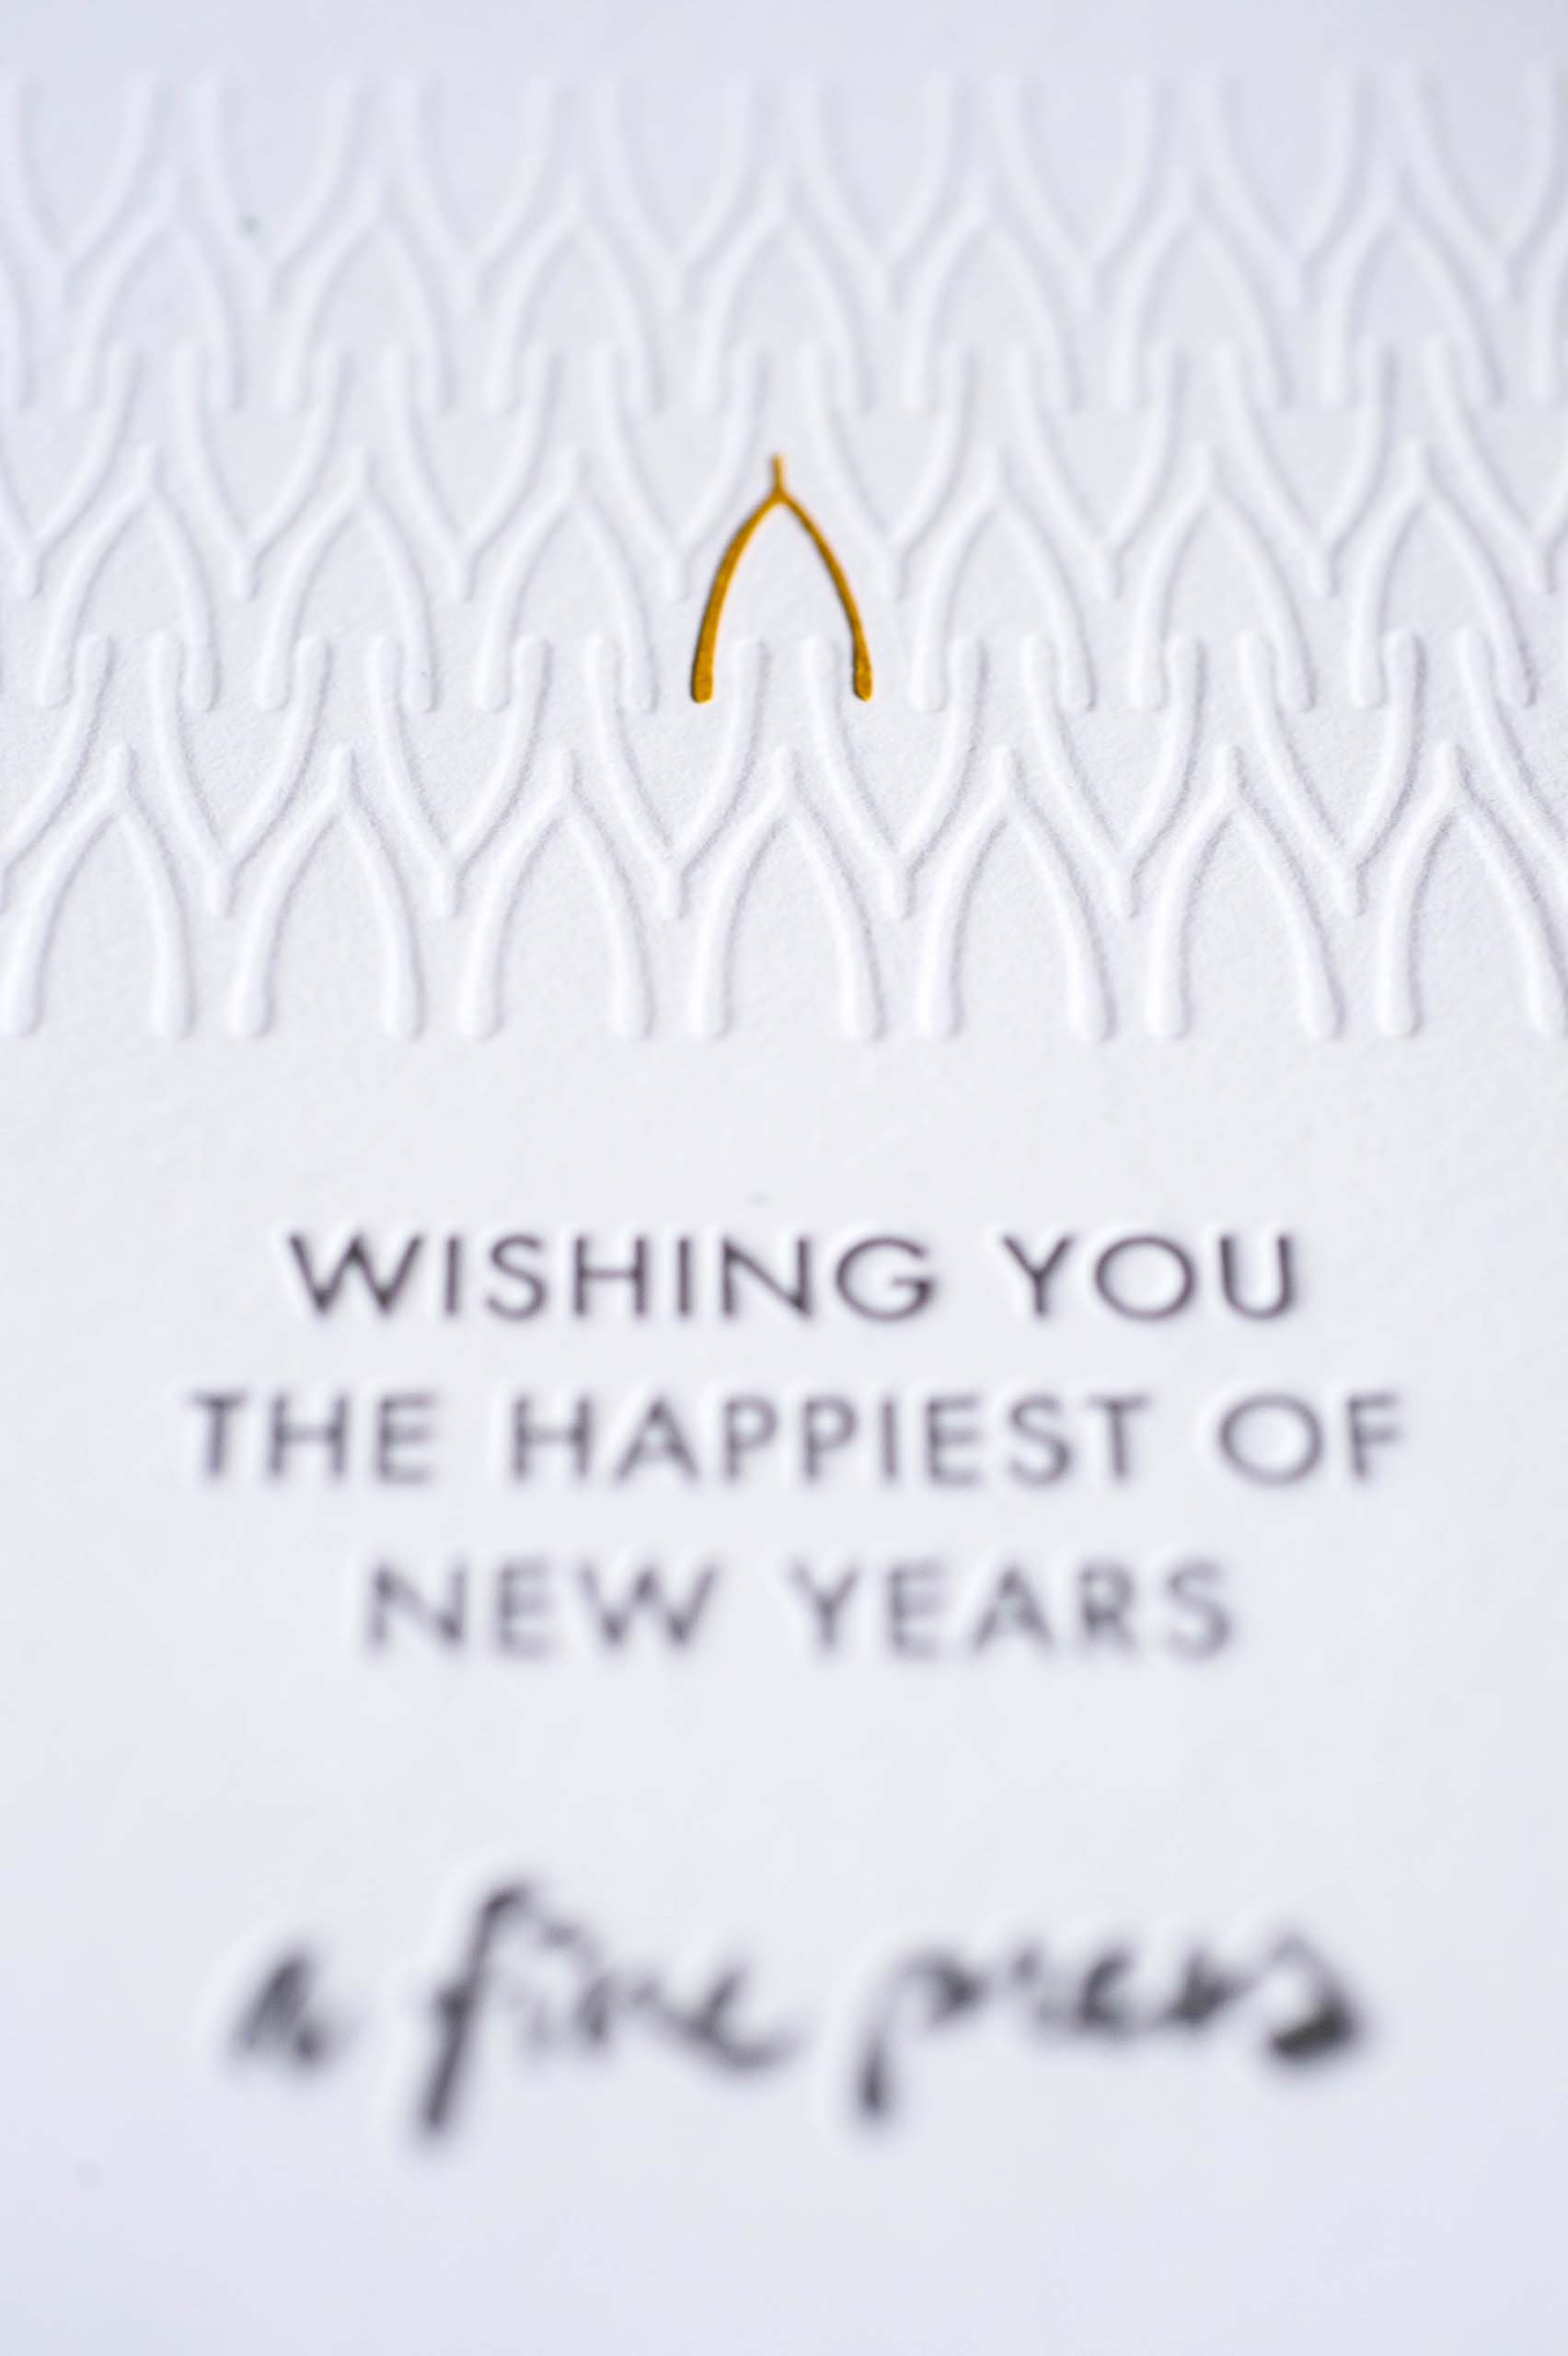 Embossed Card to Celebrate the New Year - A Fine Press